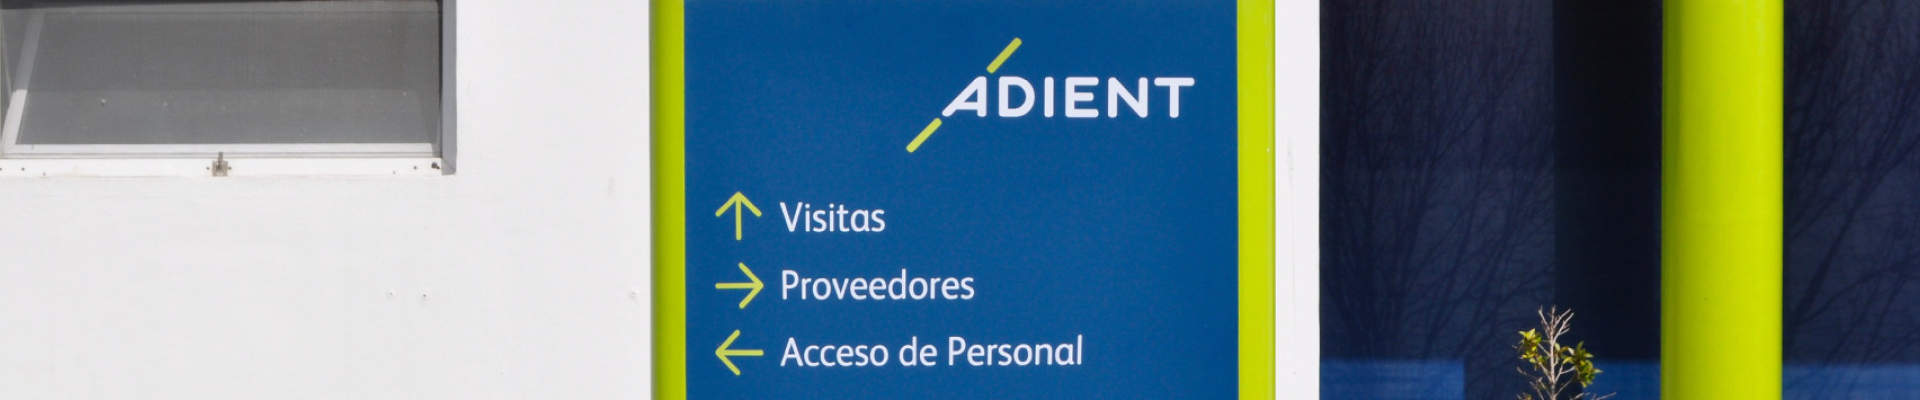 Global rebrand for Adient by Pearce Signs